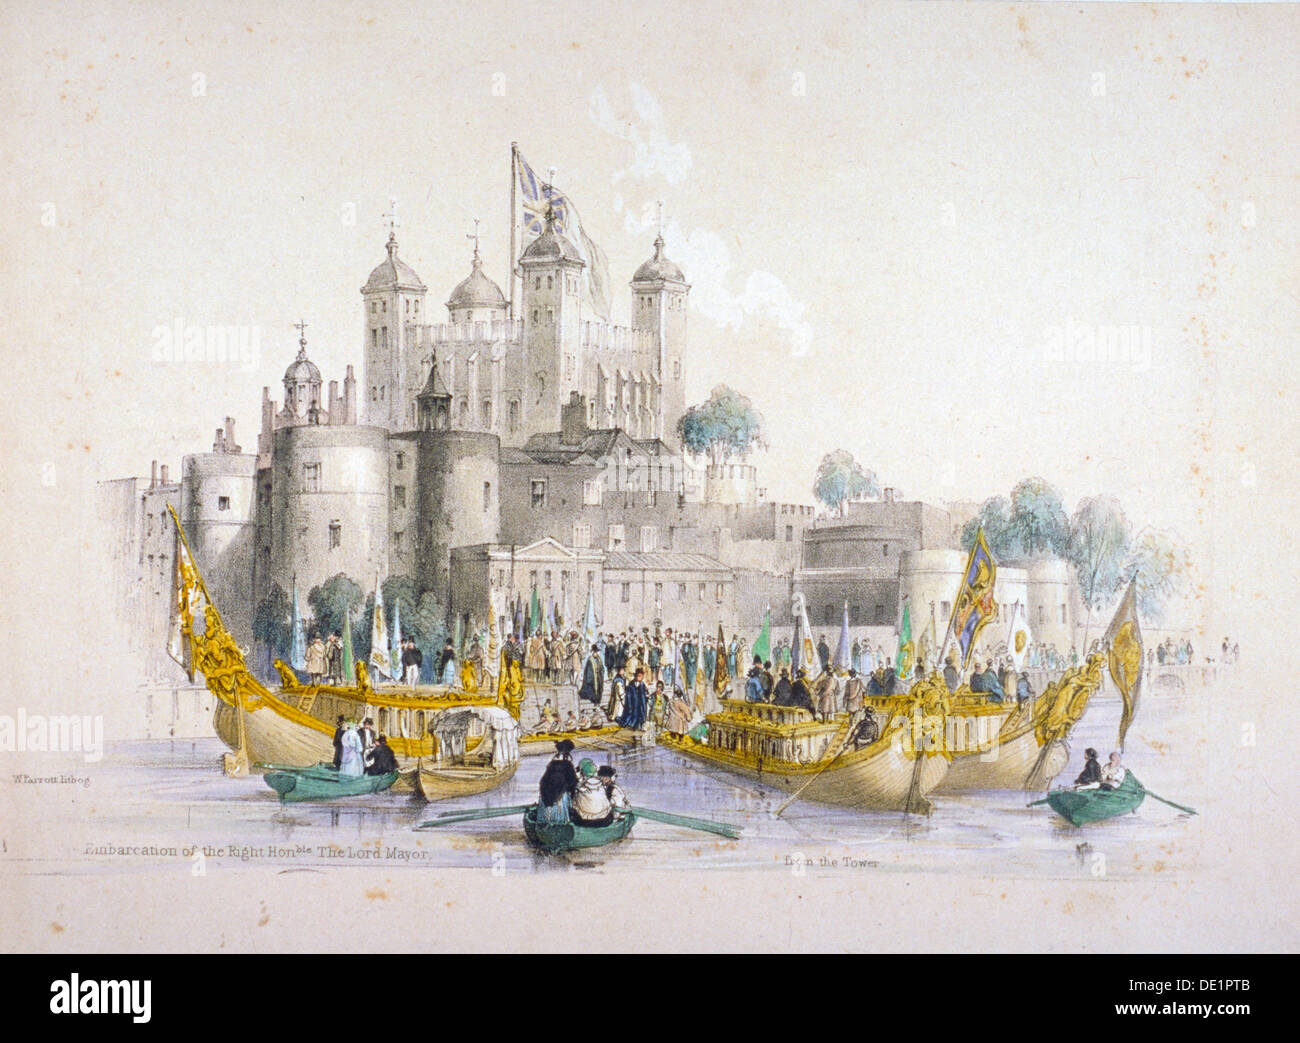 Lord Mayor Thomas Johnson and his entourage embarking from the Tower of London, 1840. Artist: William Parrott Stock Photo